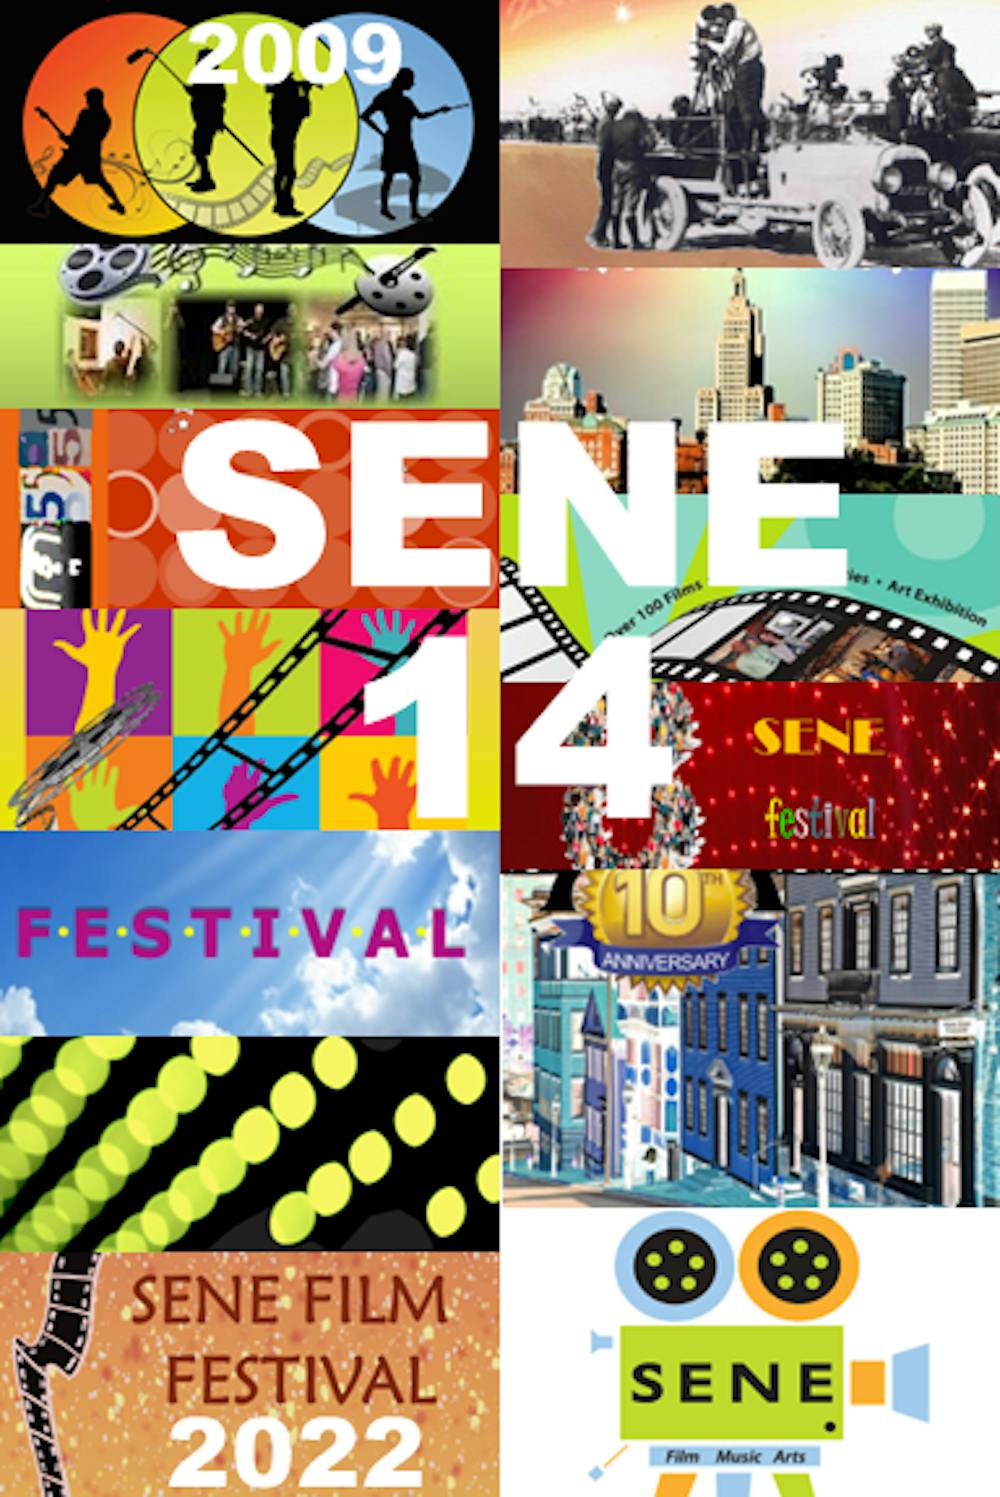 <p>The festival was selected as one of MovieMaker Magazine’s 20 Great Film Festivals for First-Time Moviemakers.</p><p>Courtesy of SENE Film Festival</p>